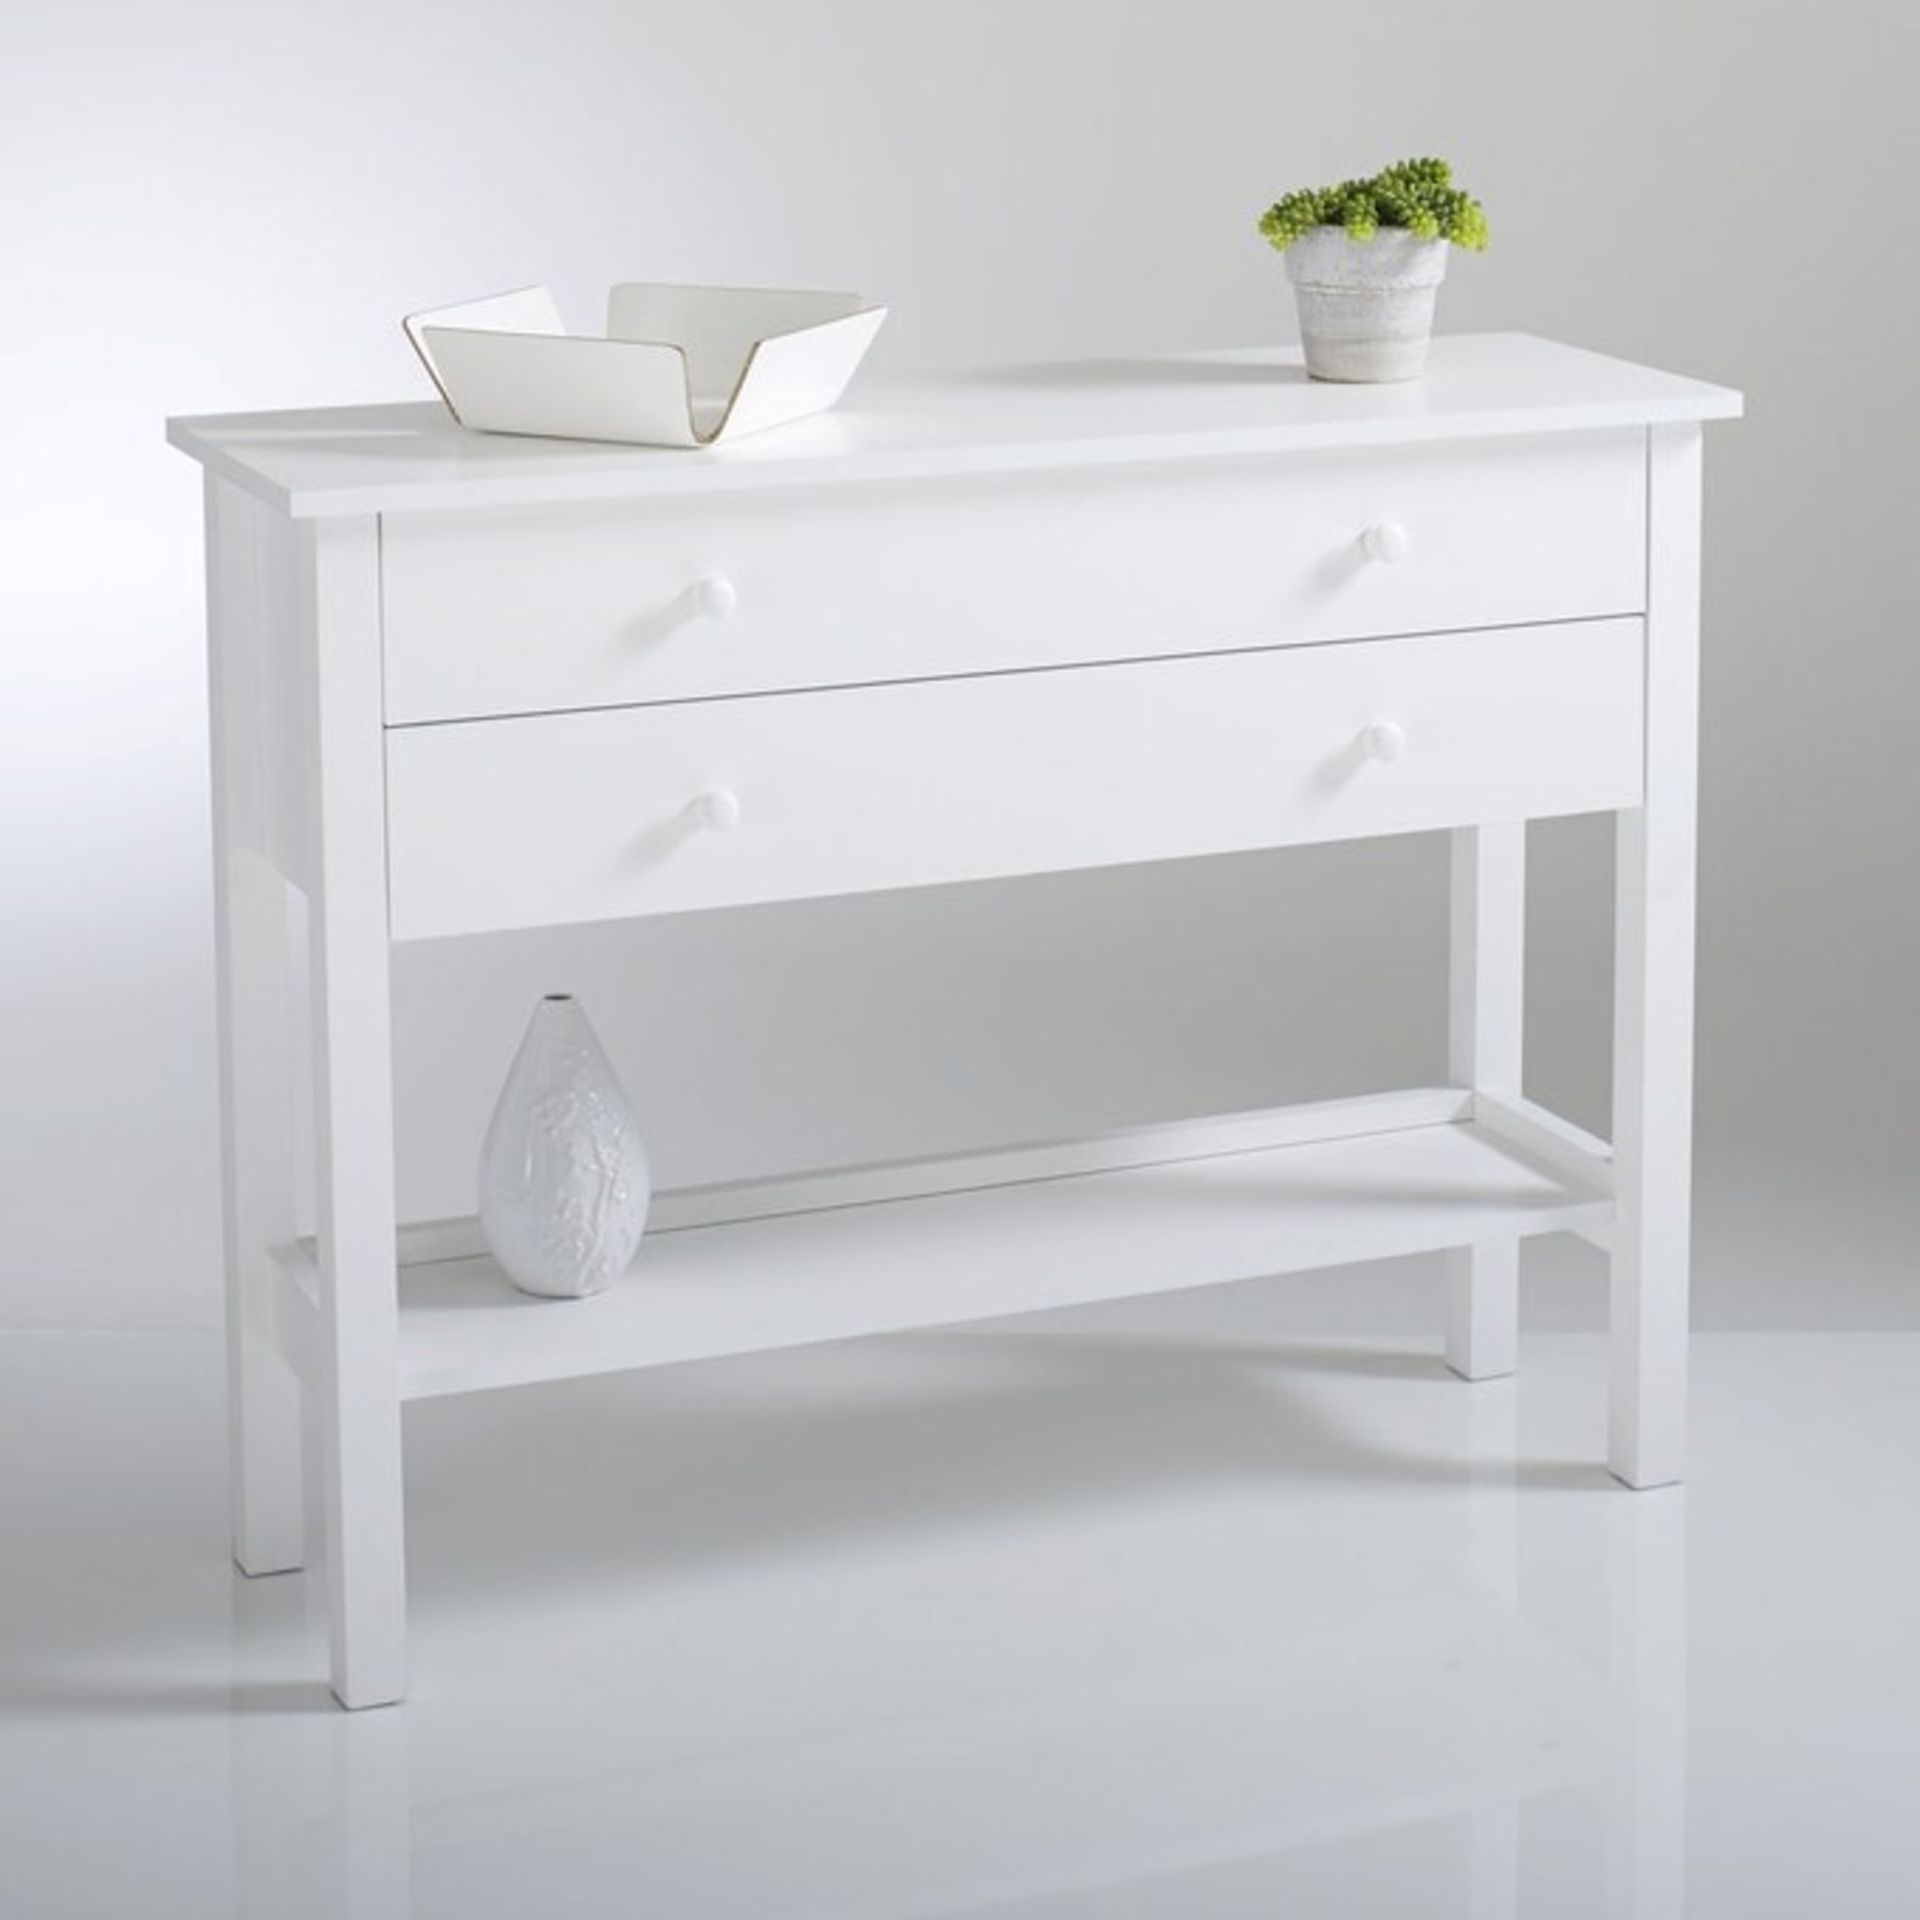 1 GRADE A BOXED PERRINE SOLID PINE CONSOLE IN WHITE / RRP £229.00 (PUBLIC VIEWING AVAILABLE) - Image 2 of 2